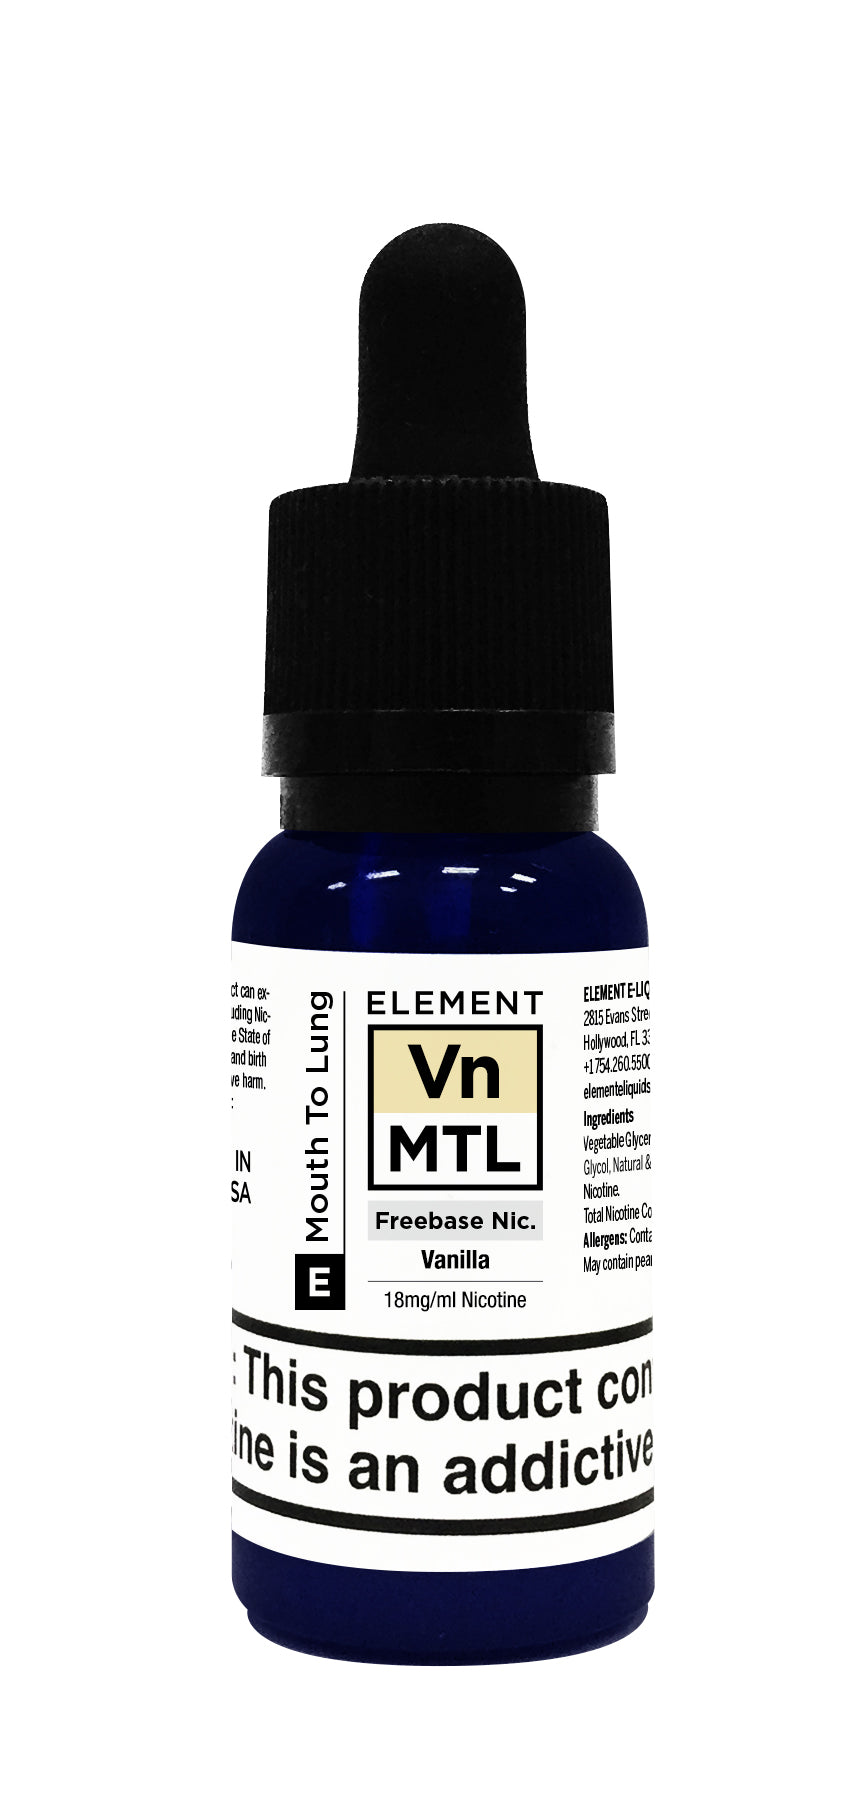 element e-liquid's mtl02brings out the best in a02mouth02